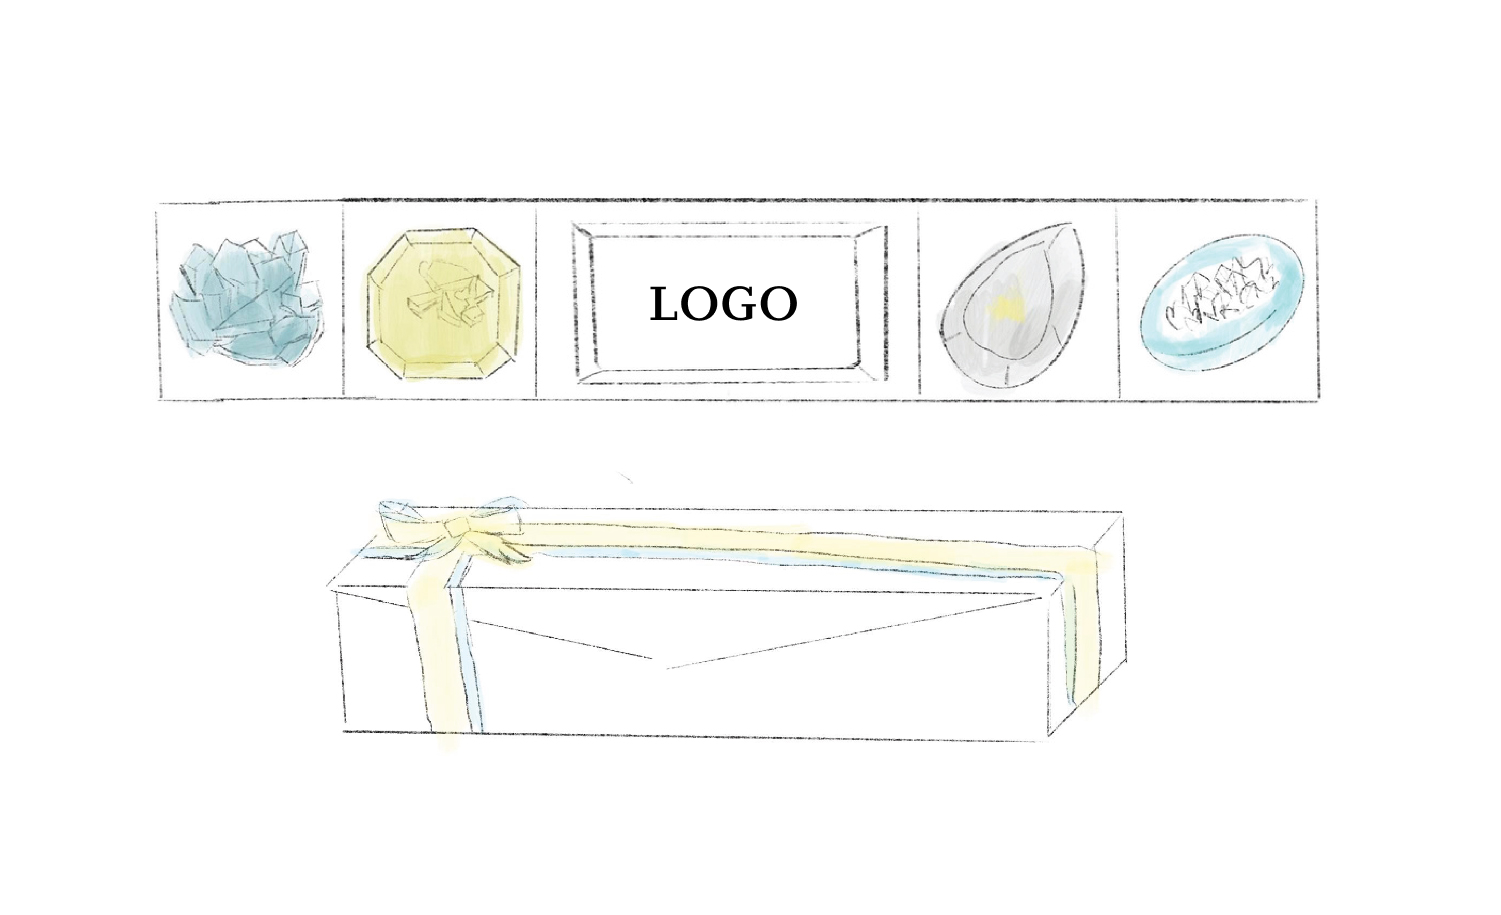 illustratio n of Example 1 giftbox. 1 logo piece is in the center and 4 misaky sweets